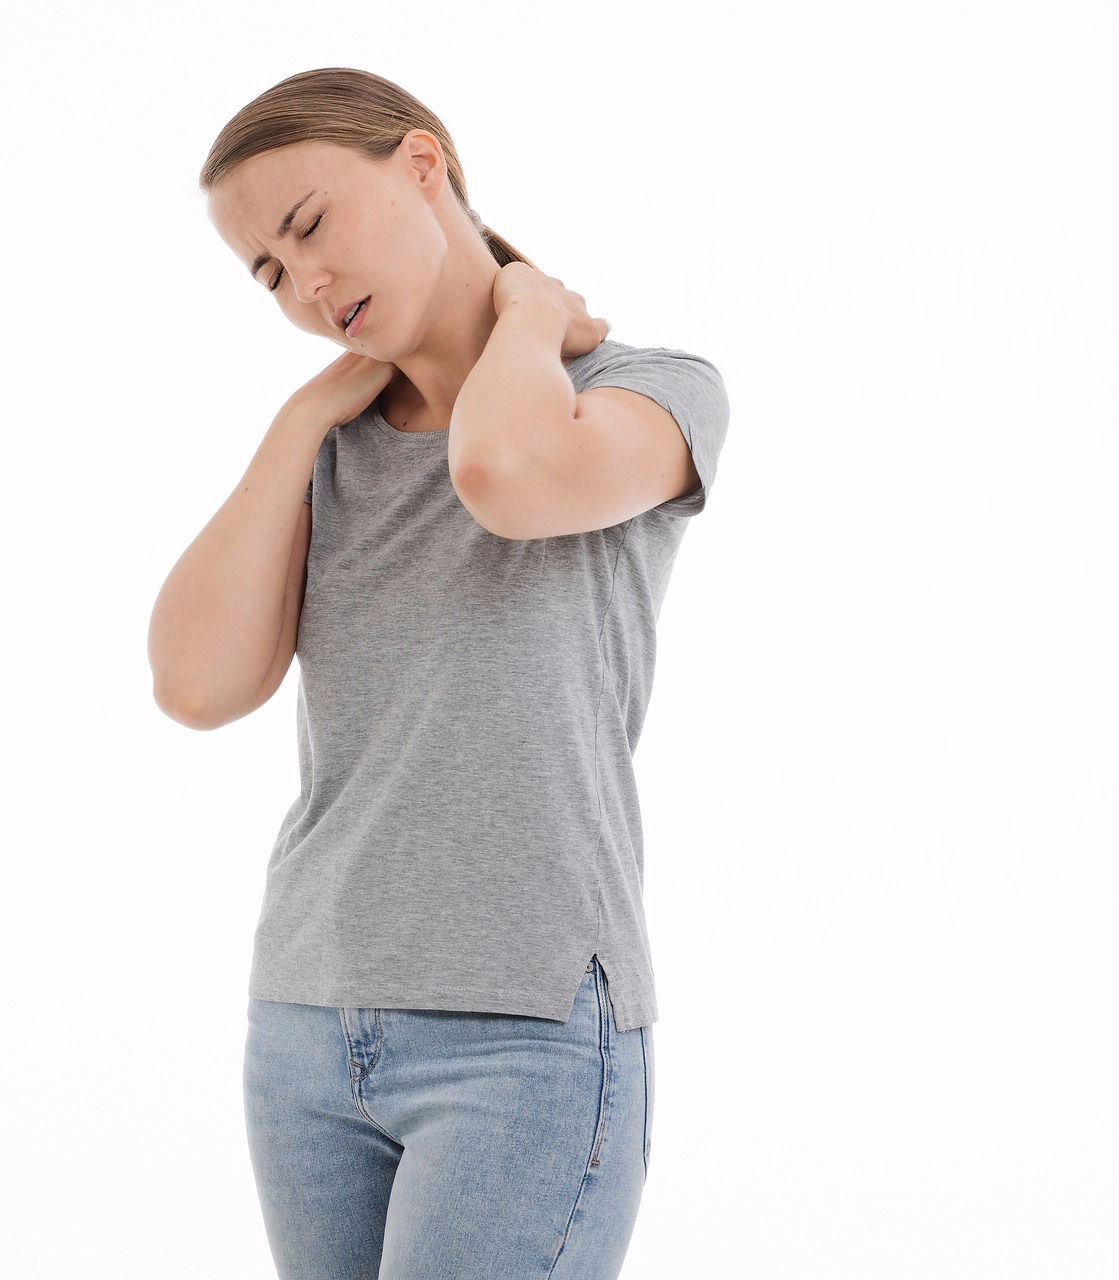 A Lady in Neck Pain | Amarillo Chiropractor | New Life Chiropractic